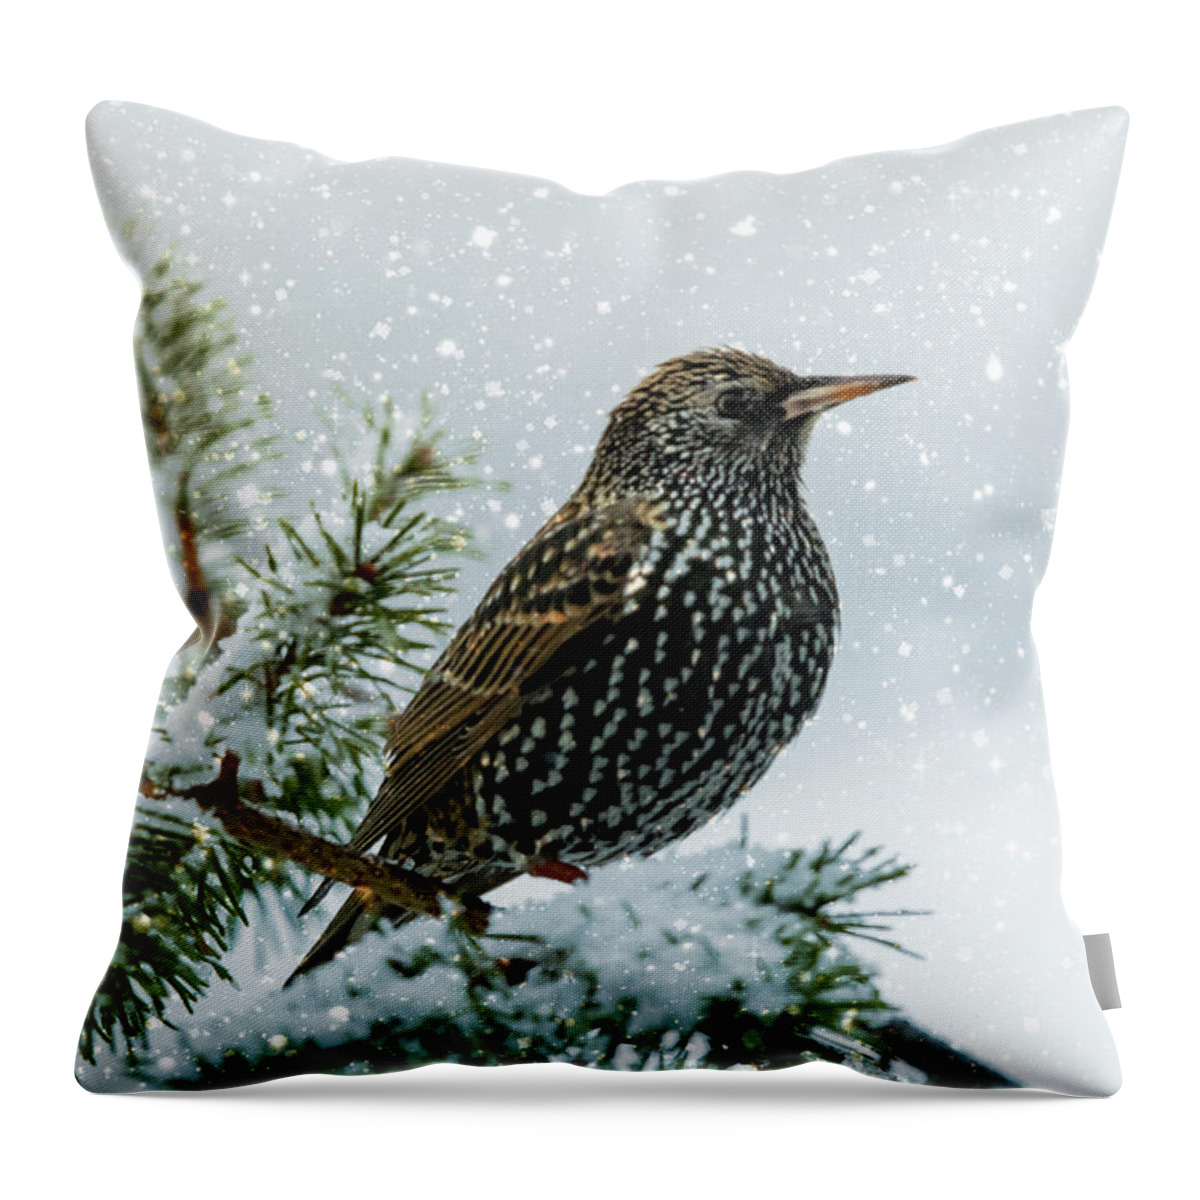 Bird Throw Pillow featuring the photograph Starling In Snow by Cathy Kovarik